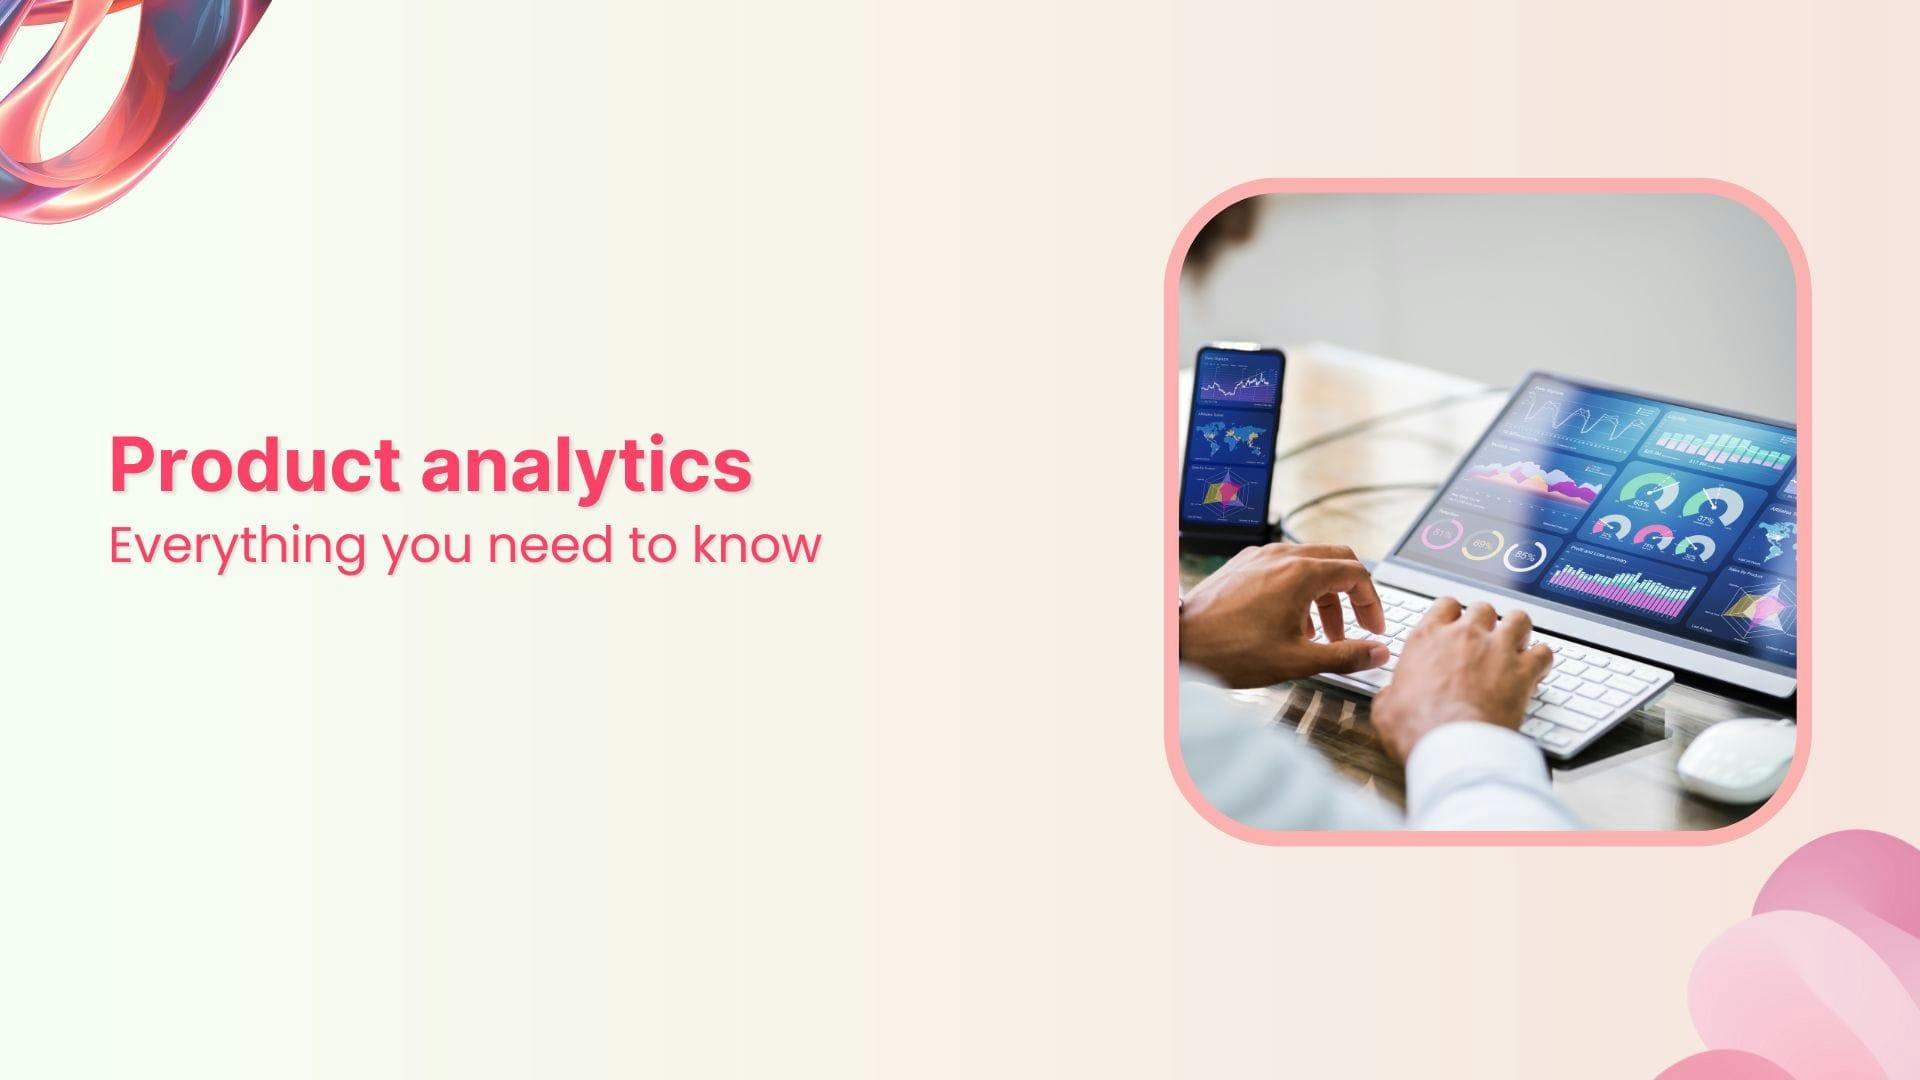 Everything you need to know about product analytics